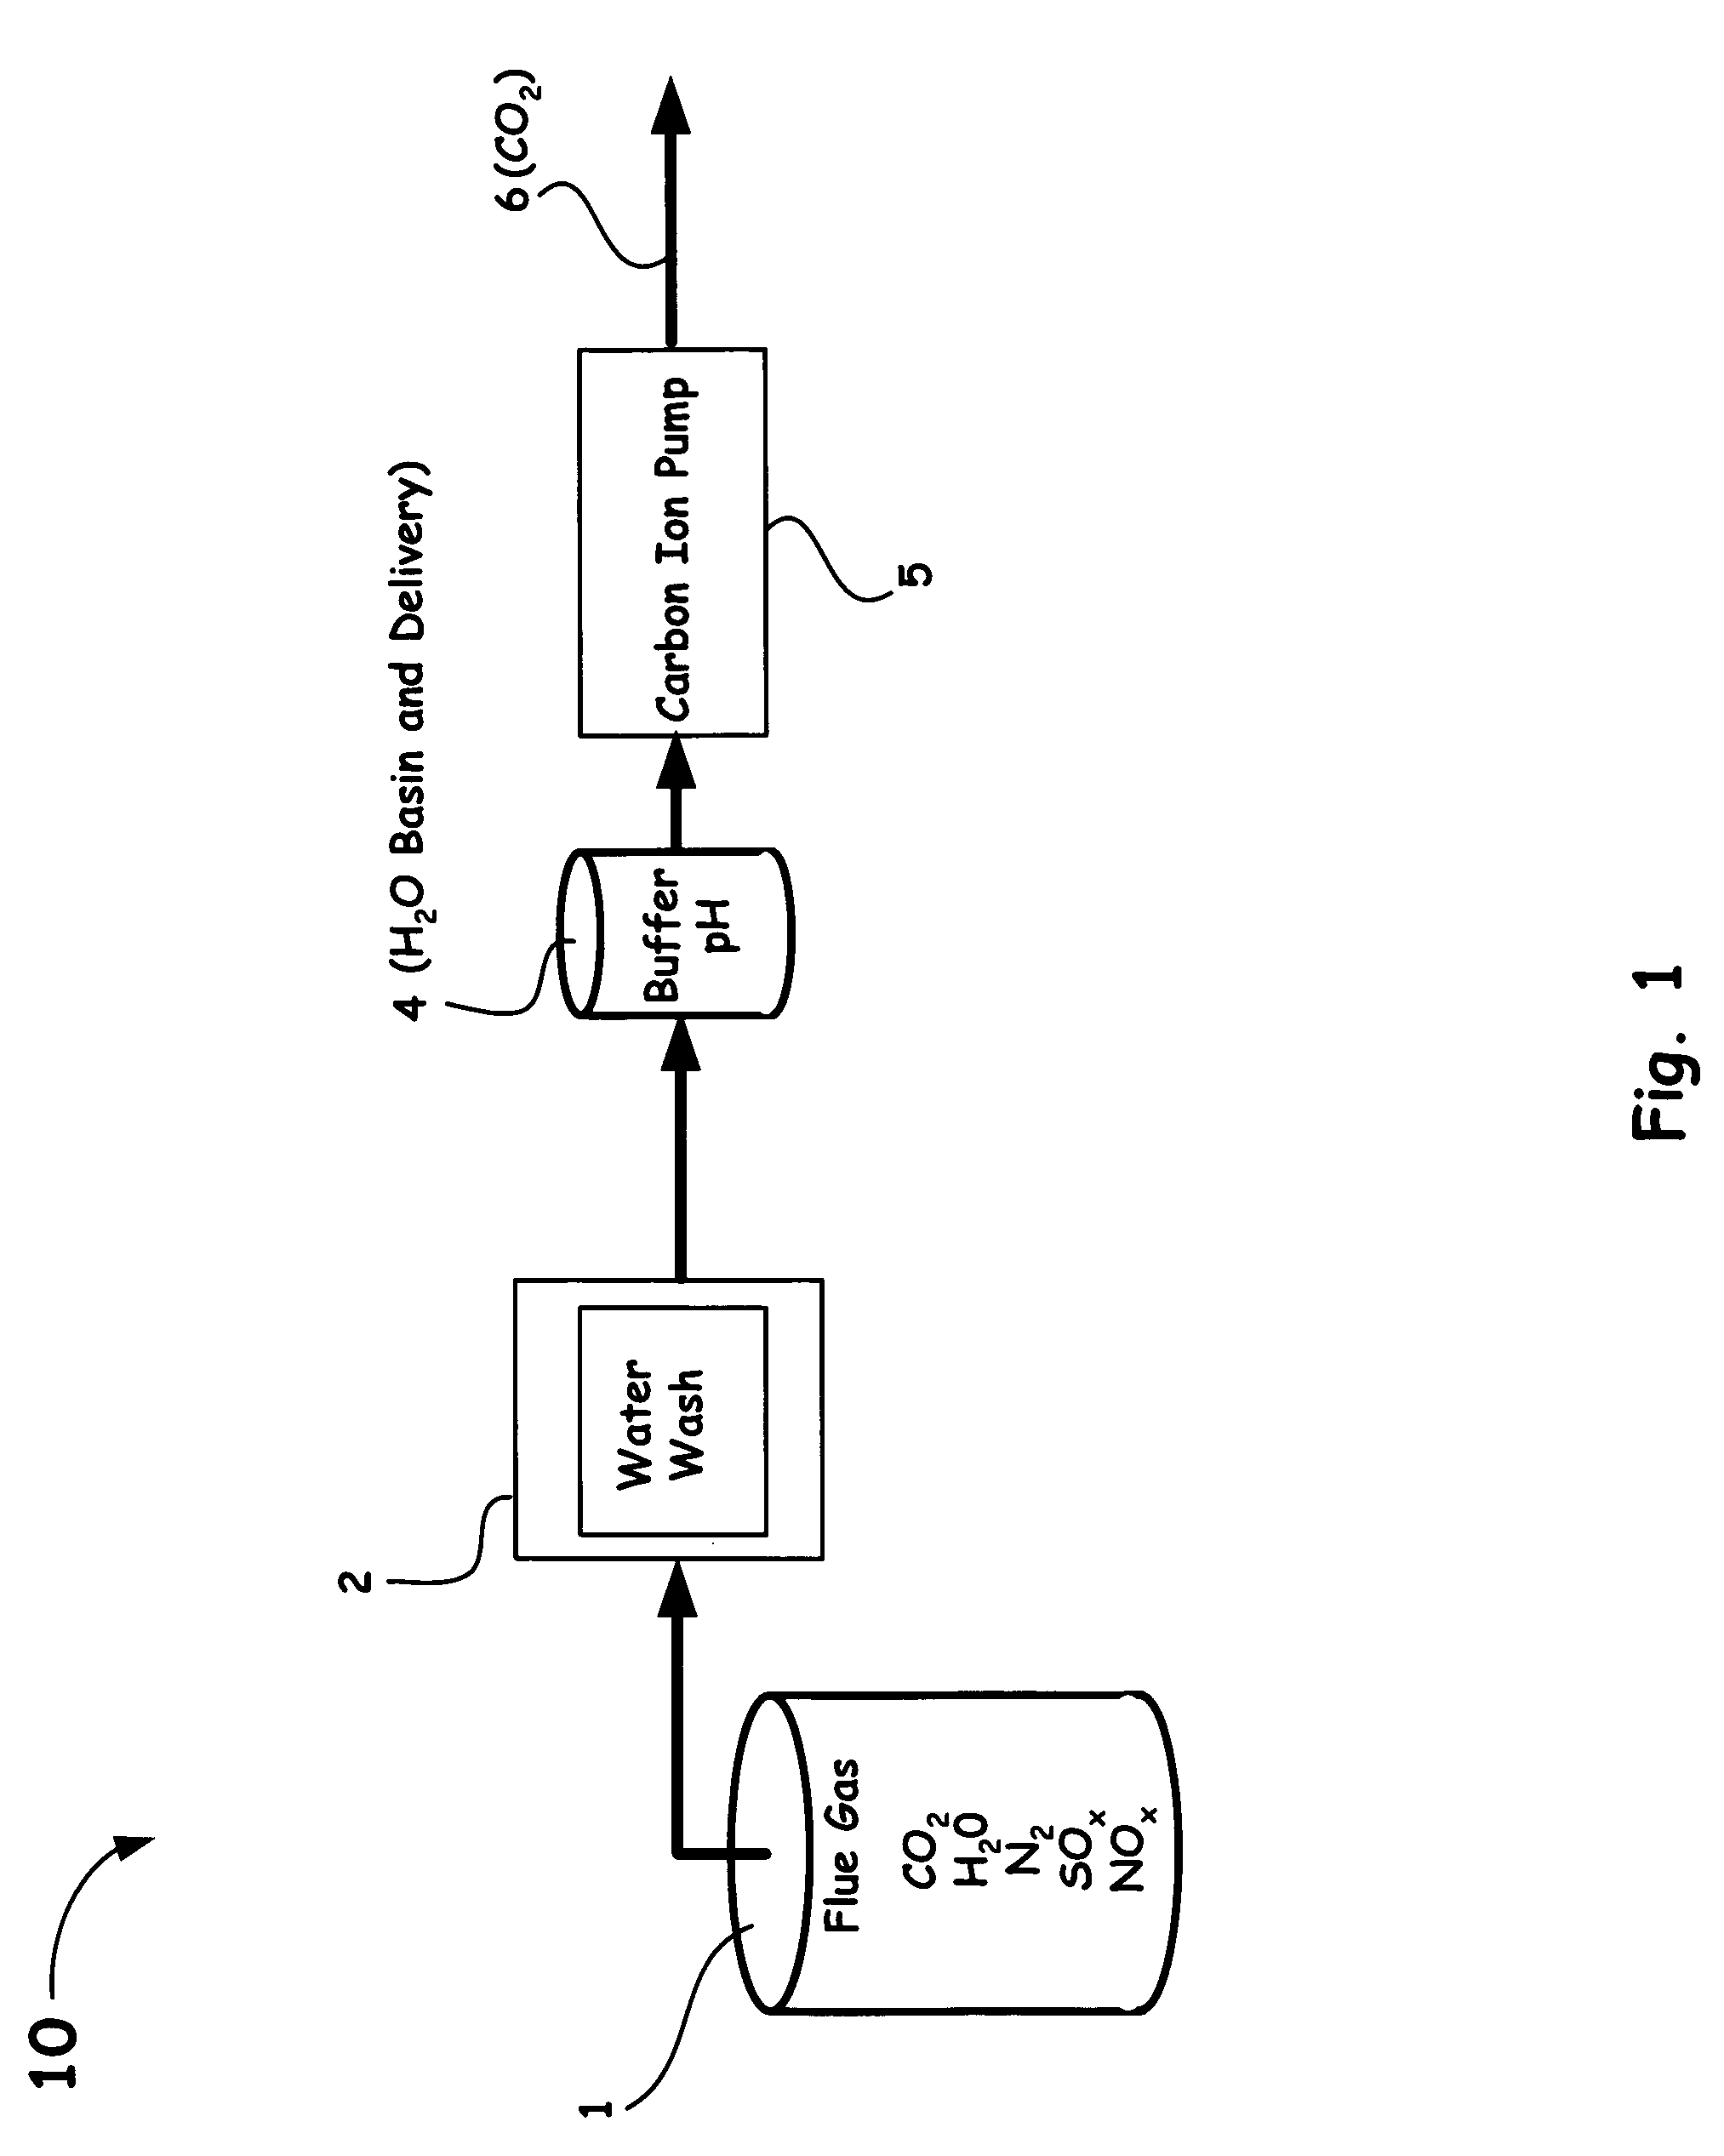 Carbon ion pump for removal of carbon dioxide from combustion gas and other gas mixtures